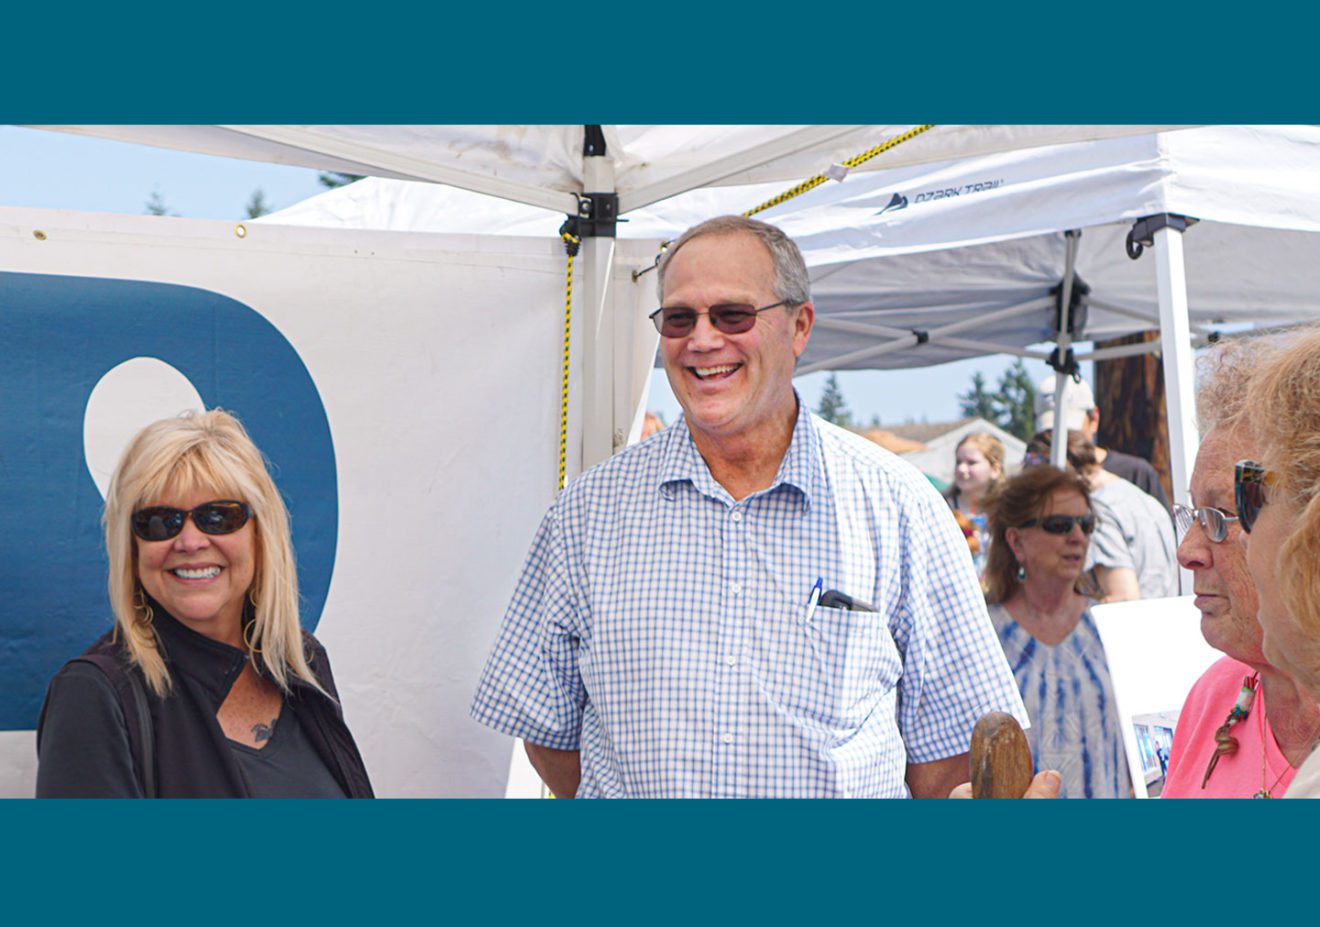 General Manager Kevin Streett smiling and talking with customers at the pUD booth during an outdoor event.